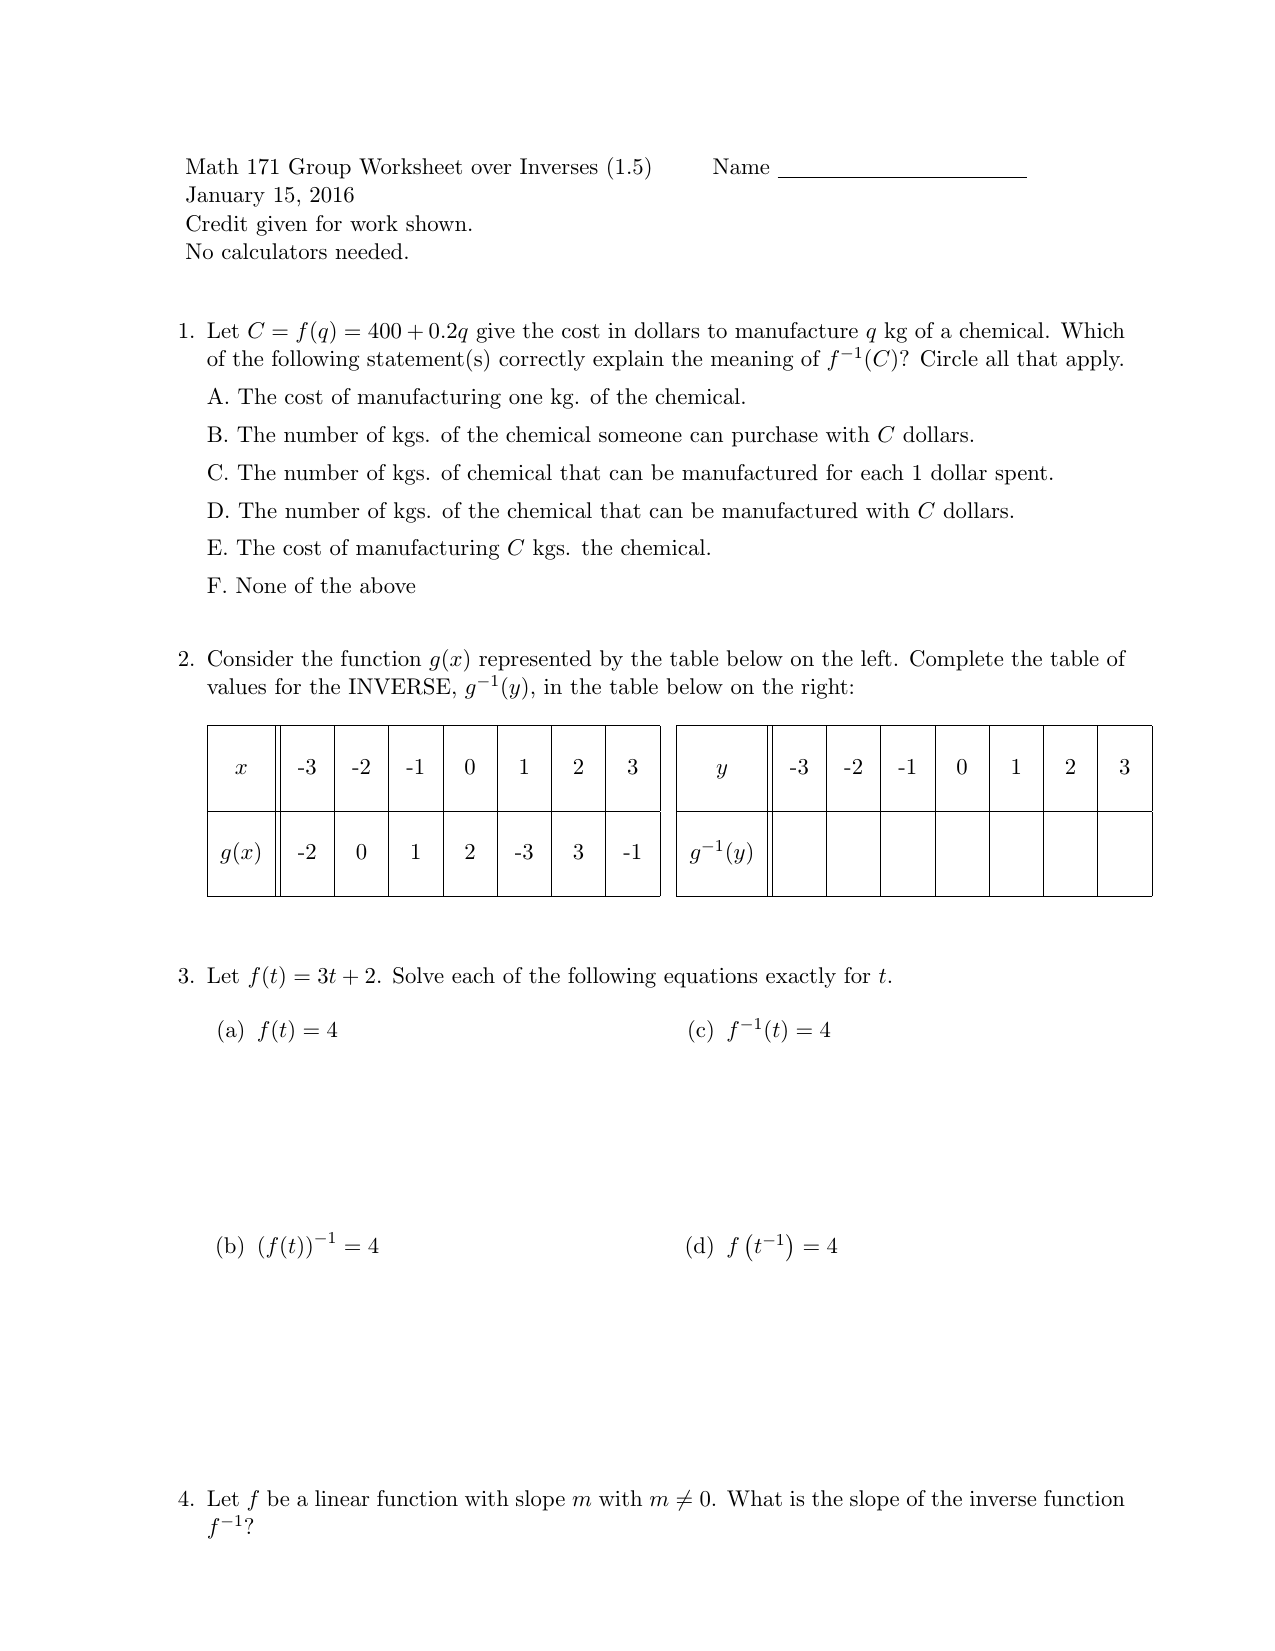 math-171-group-worksheet-over-inverses-1-5-name-january-15-2016